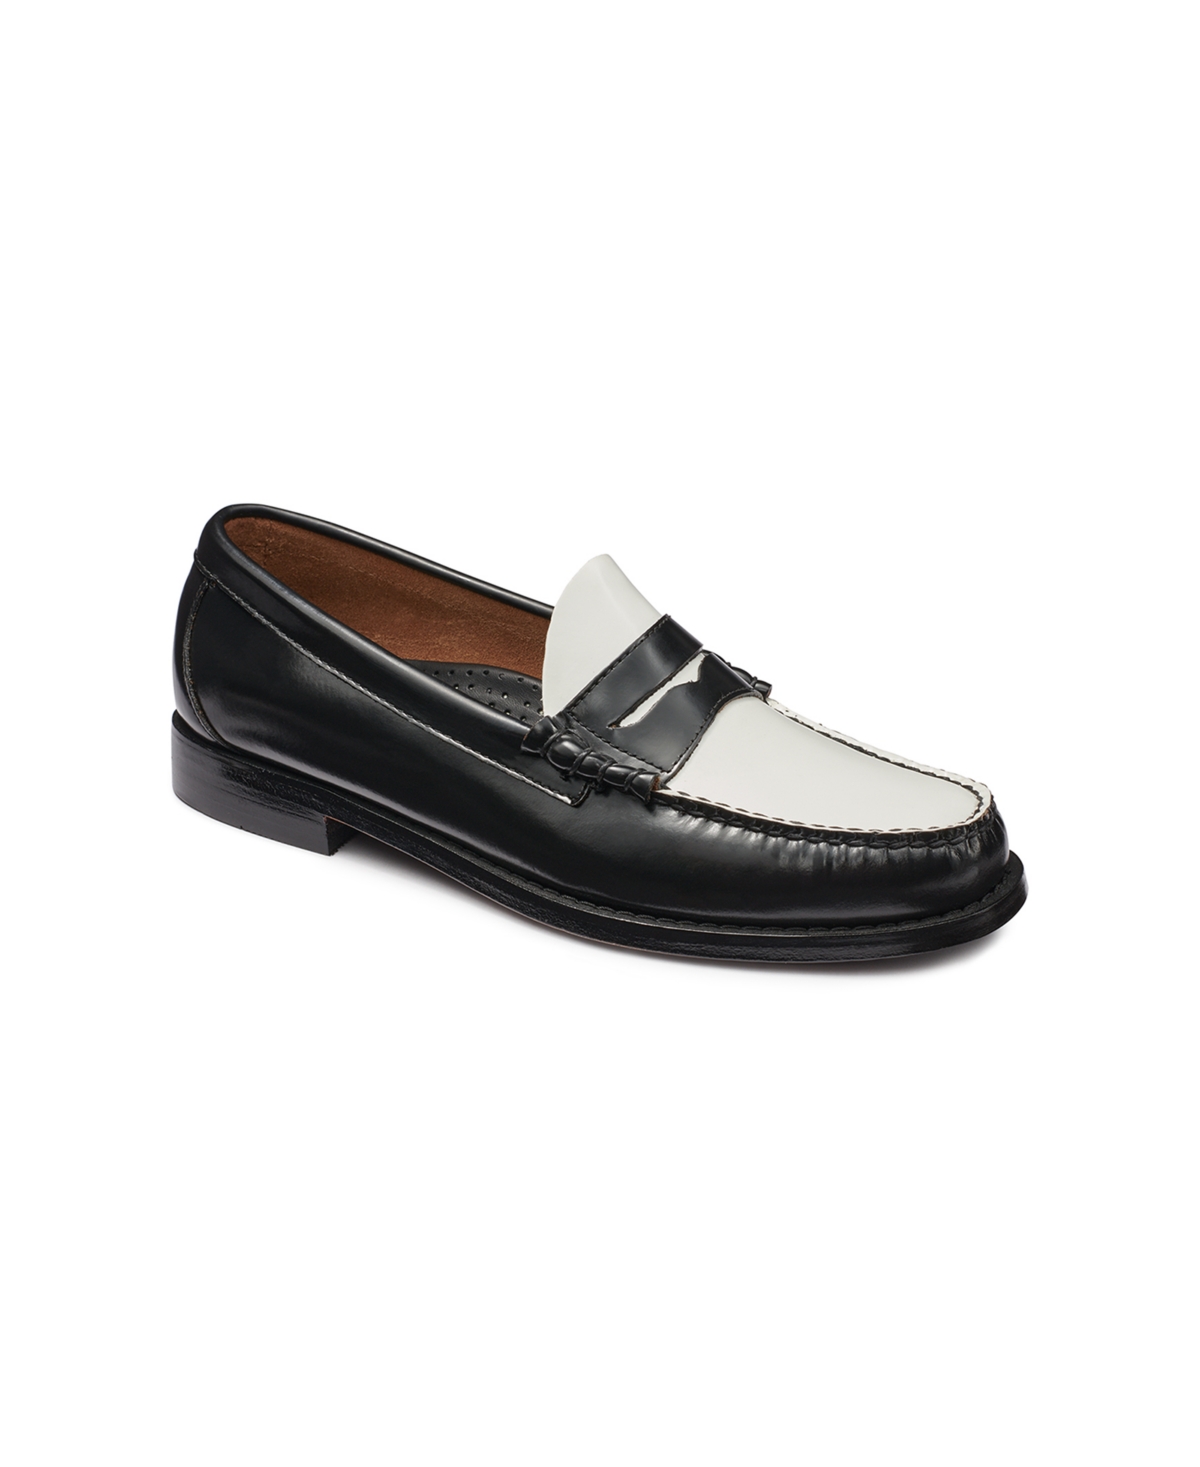 G.H. BASS & CO. G.H.BASS MEN'S LARSON WEEJUNS LOAFERS MEN'S SHOES